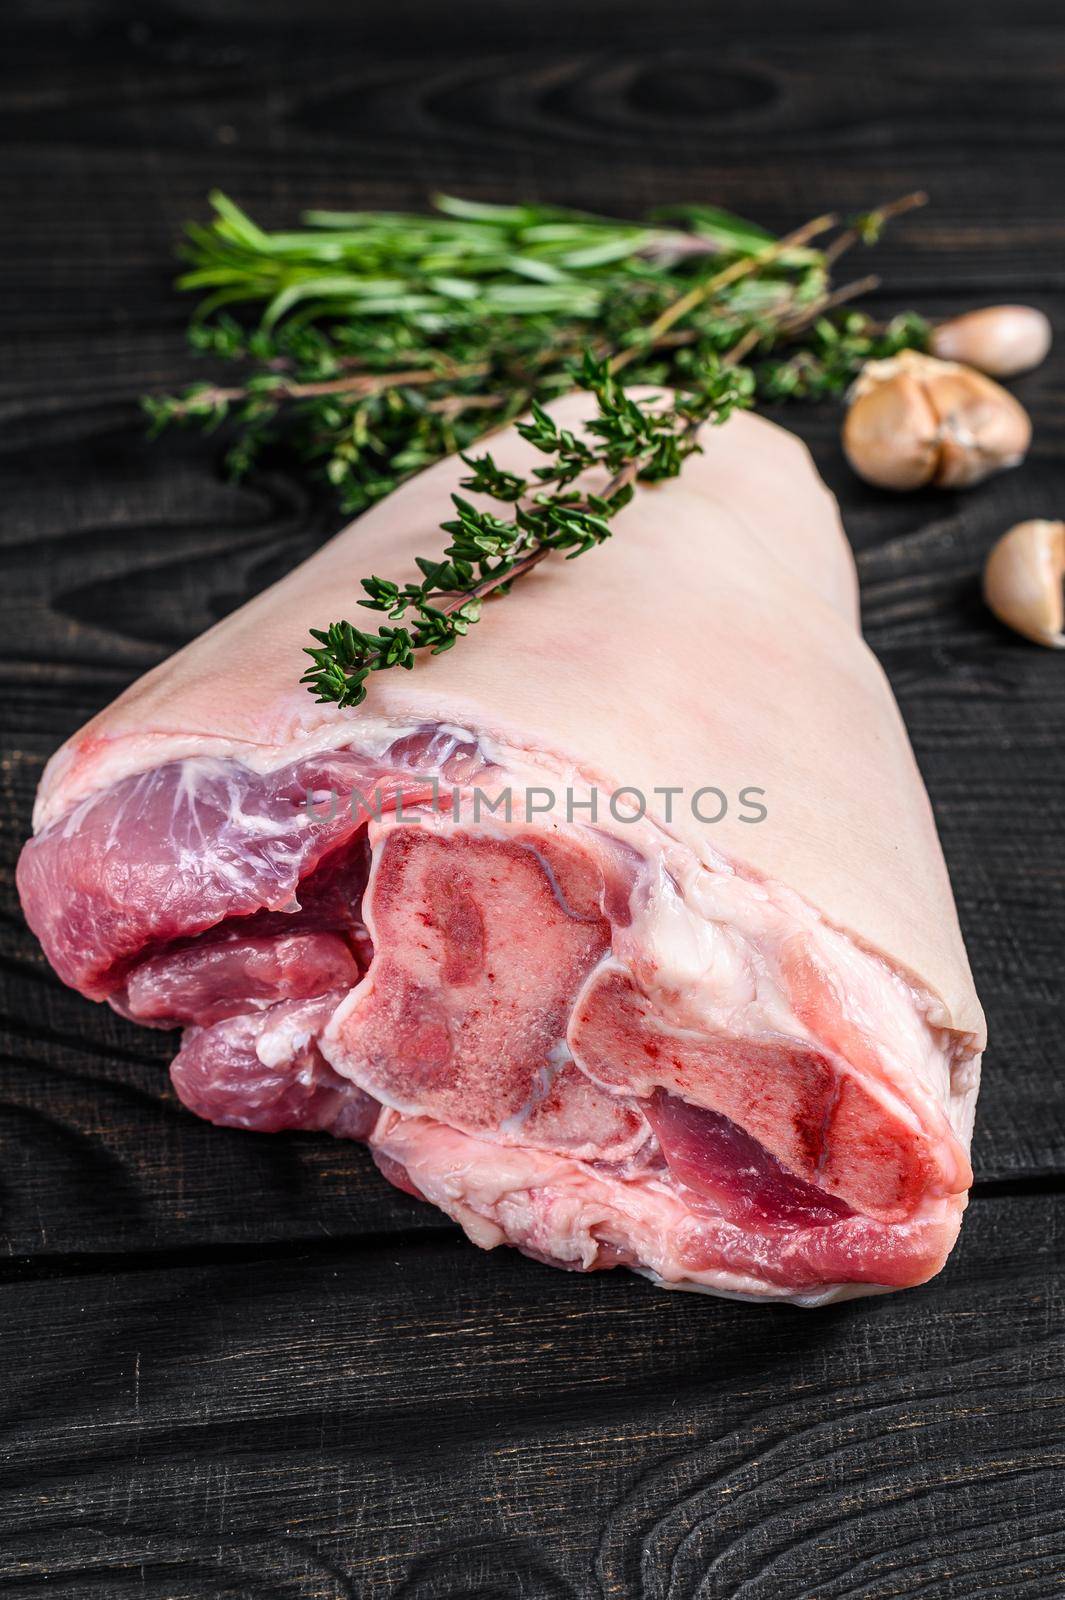 Raw Pork knuckle leg meat on kitchen table with herbs. Black wooden background. Top view by Composter